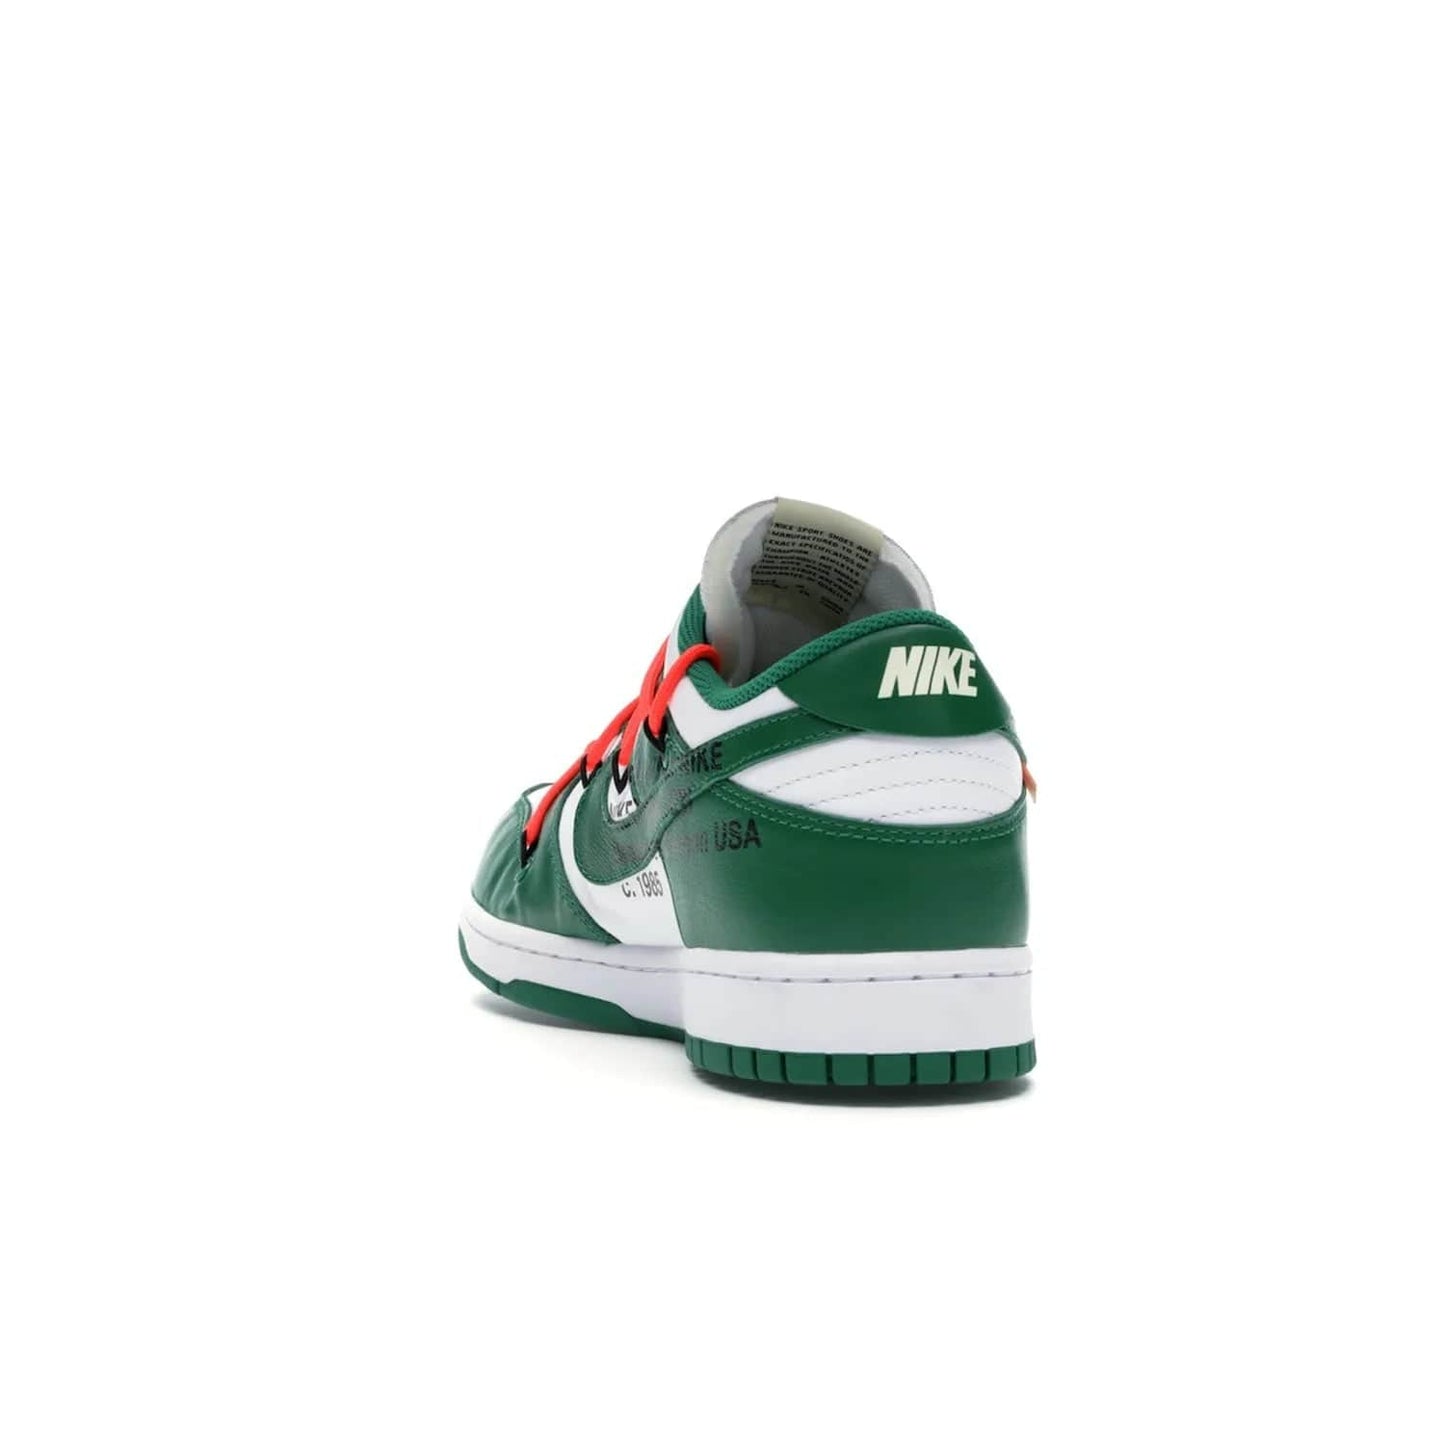 Nike Dunk Low Off-White Pine Green - Image 26 - Only at www.BallersClubKickz.com - The Nike Dunk Low Off-White Pine Green combines classic 1980s style with modern-day design. Featuring white leather uppers and pine green overlays, these classic kicks feature secondary lacing system, zip-ties and signature Off-White text. Releasing in December 2019, these shoes are a timeless classic for any wardrobe.